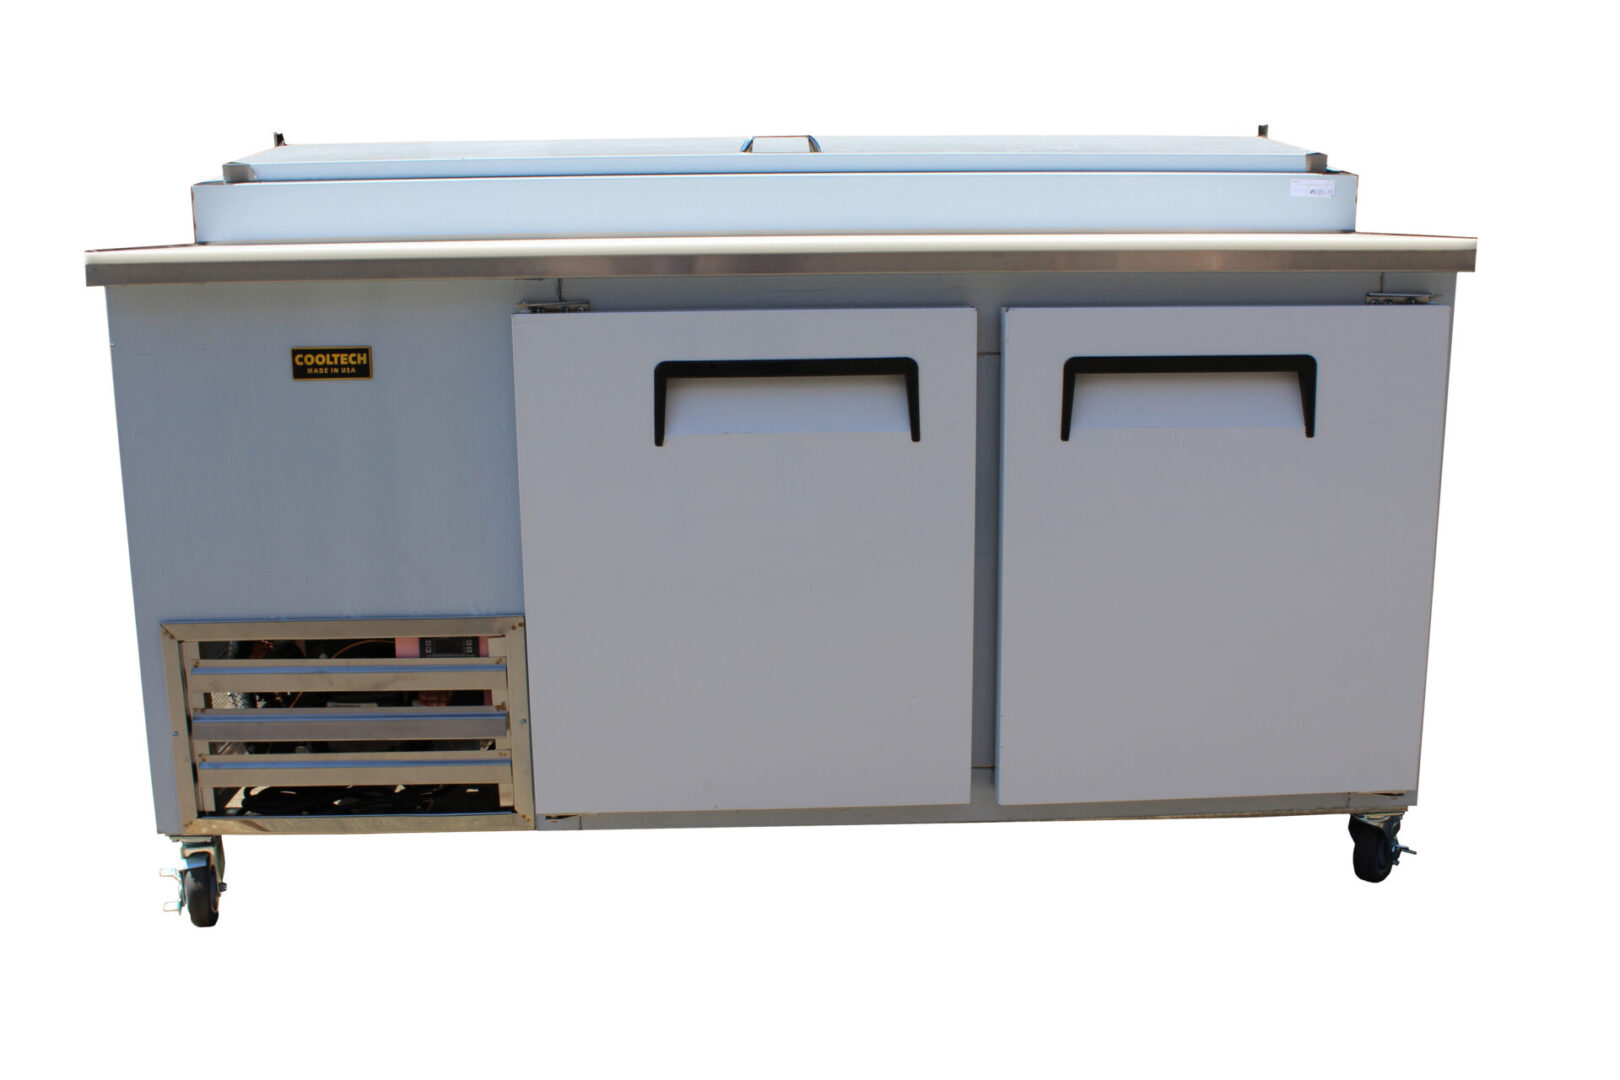 A large New Cooltech 2 Door Refrigerated Pizza Prep Table 67” with wheels, isolated on a white background.